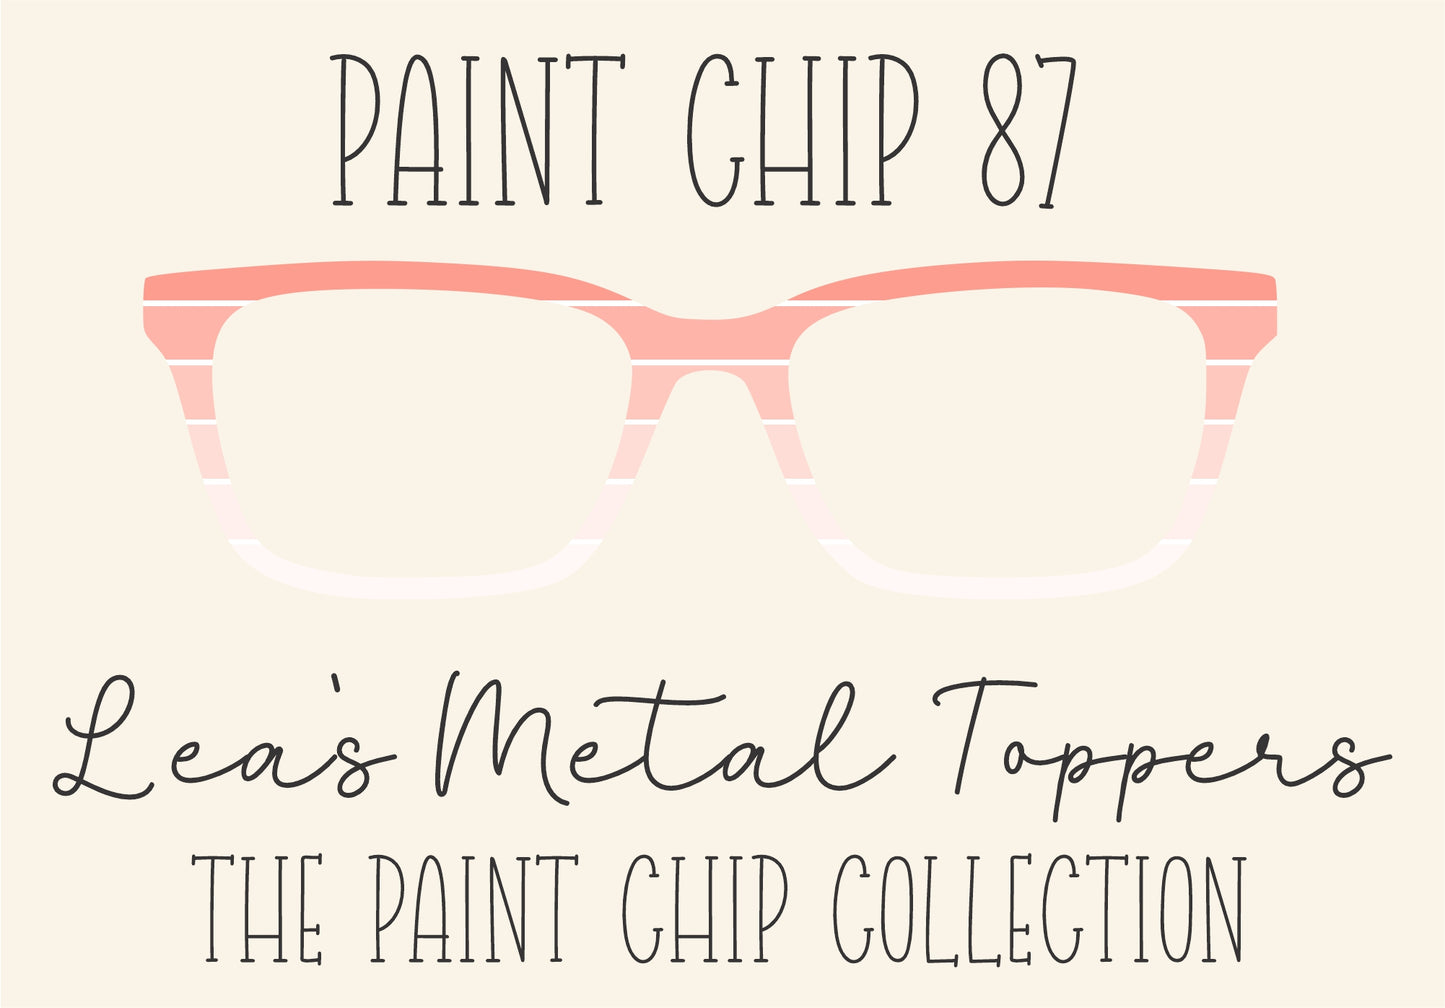 PAINT CHIP 87 Eyewear Frame Toppers COMES WITH MAGNETS